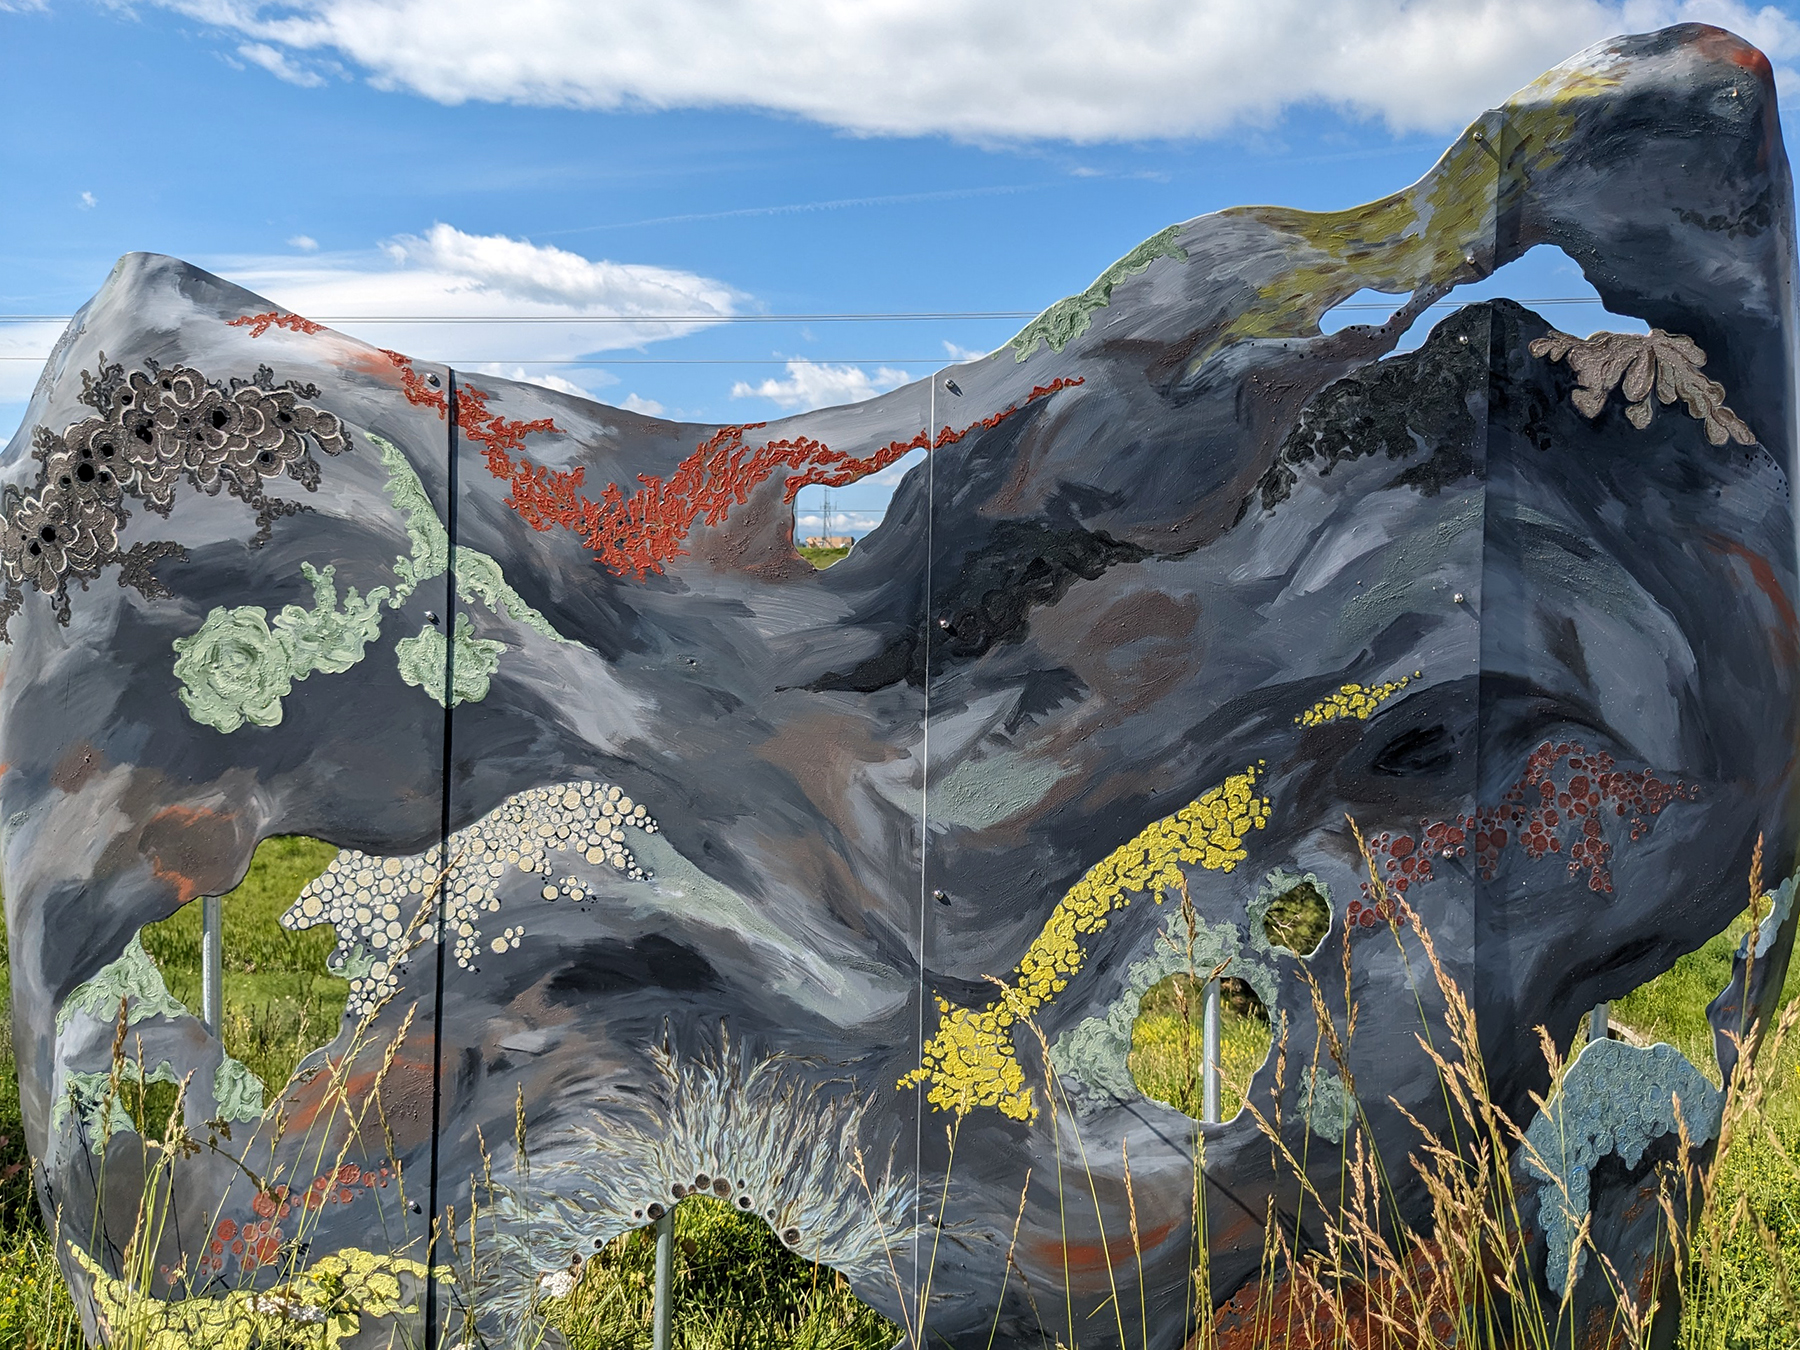 An art exhibition of a two dimensional representation of a mountain covered in various types of growth, displayed outdoors.